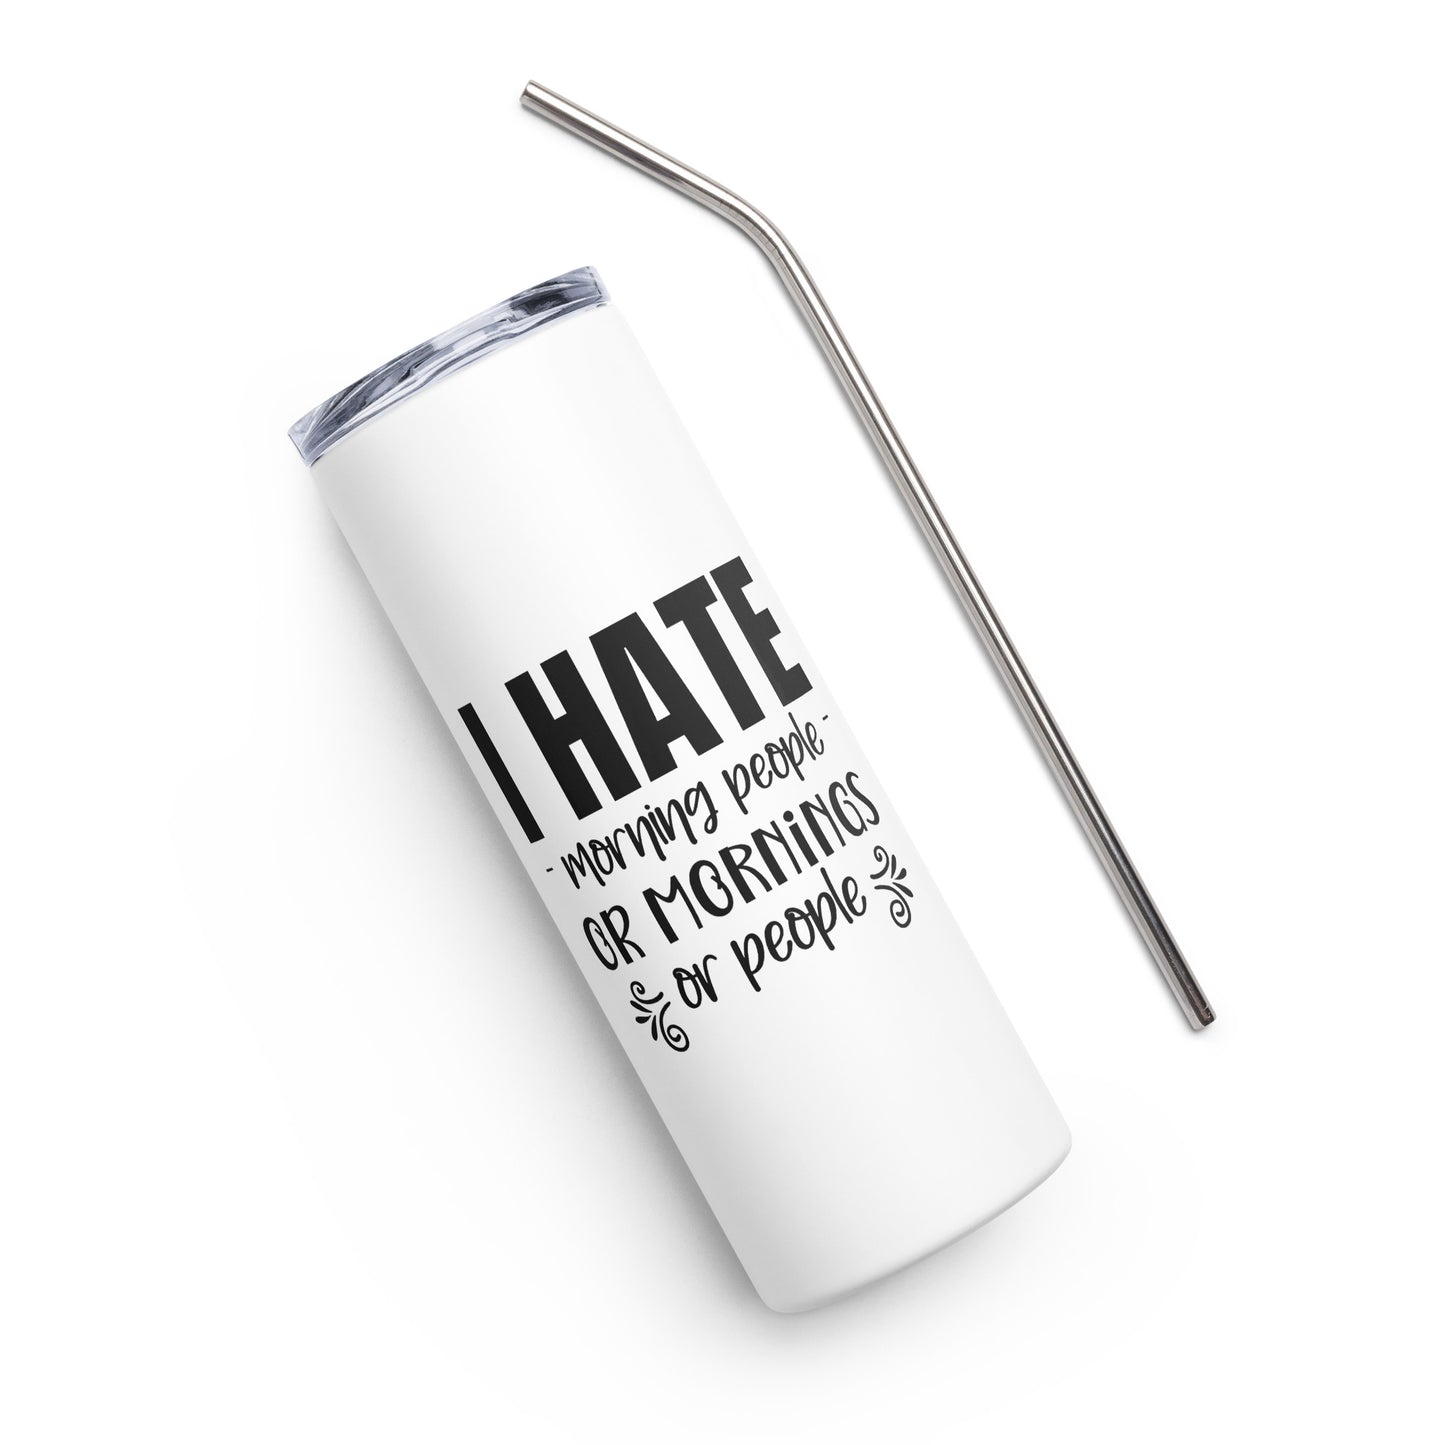 I Hate Morning People Stainless steel tumbler